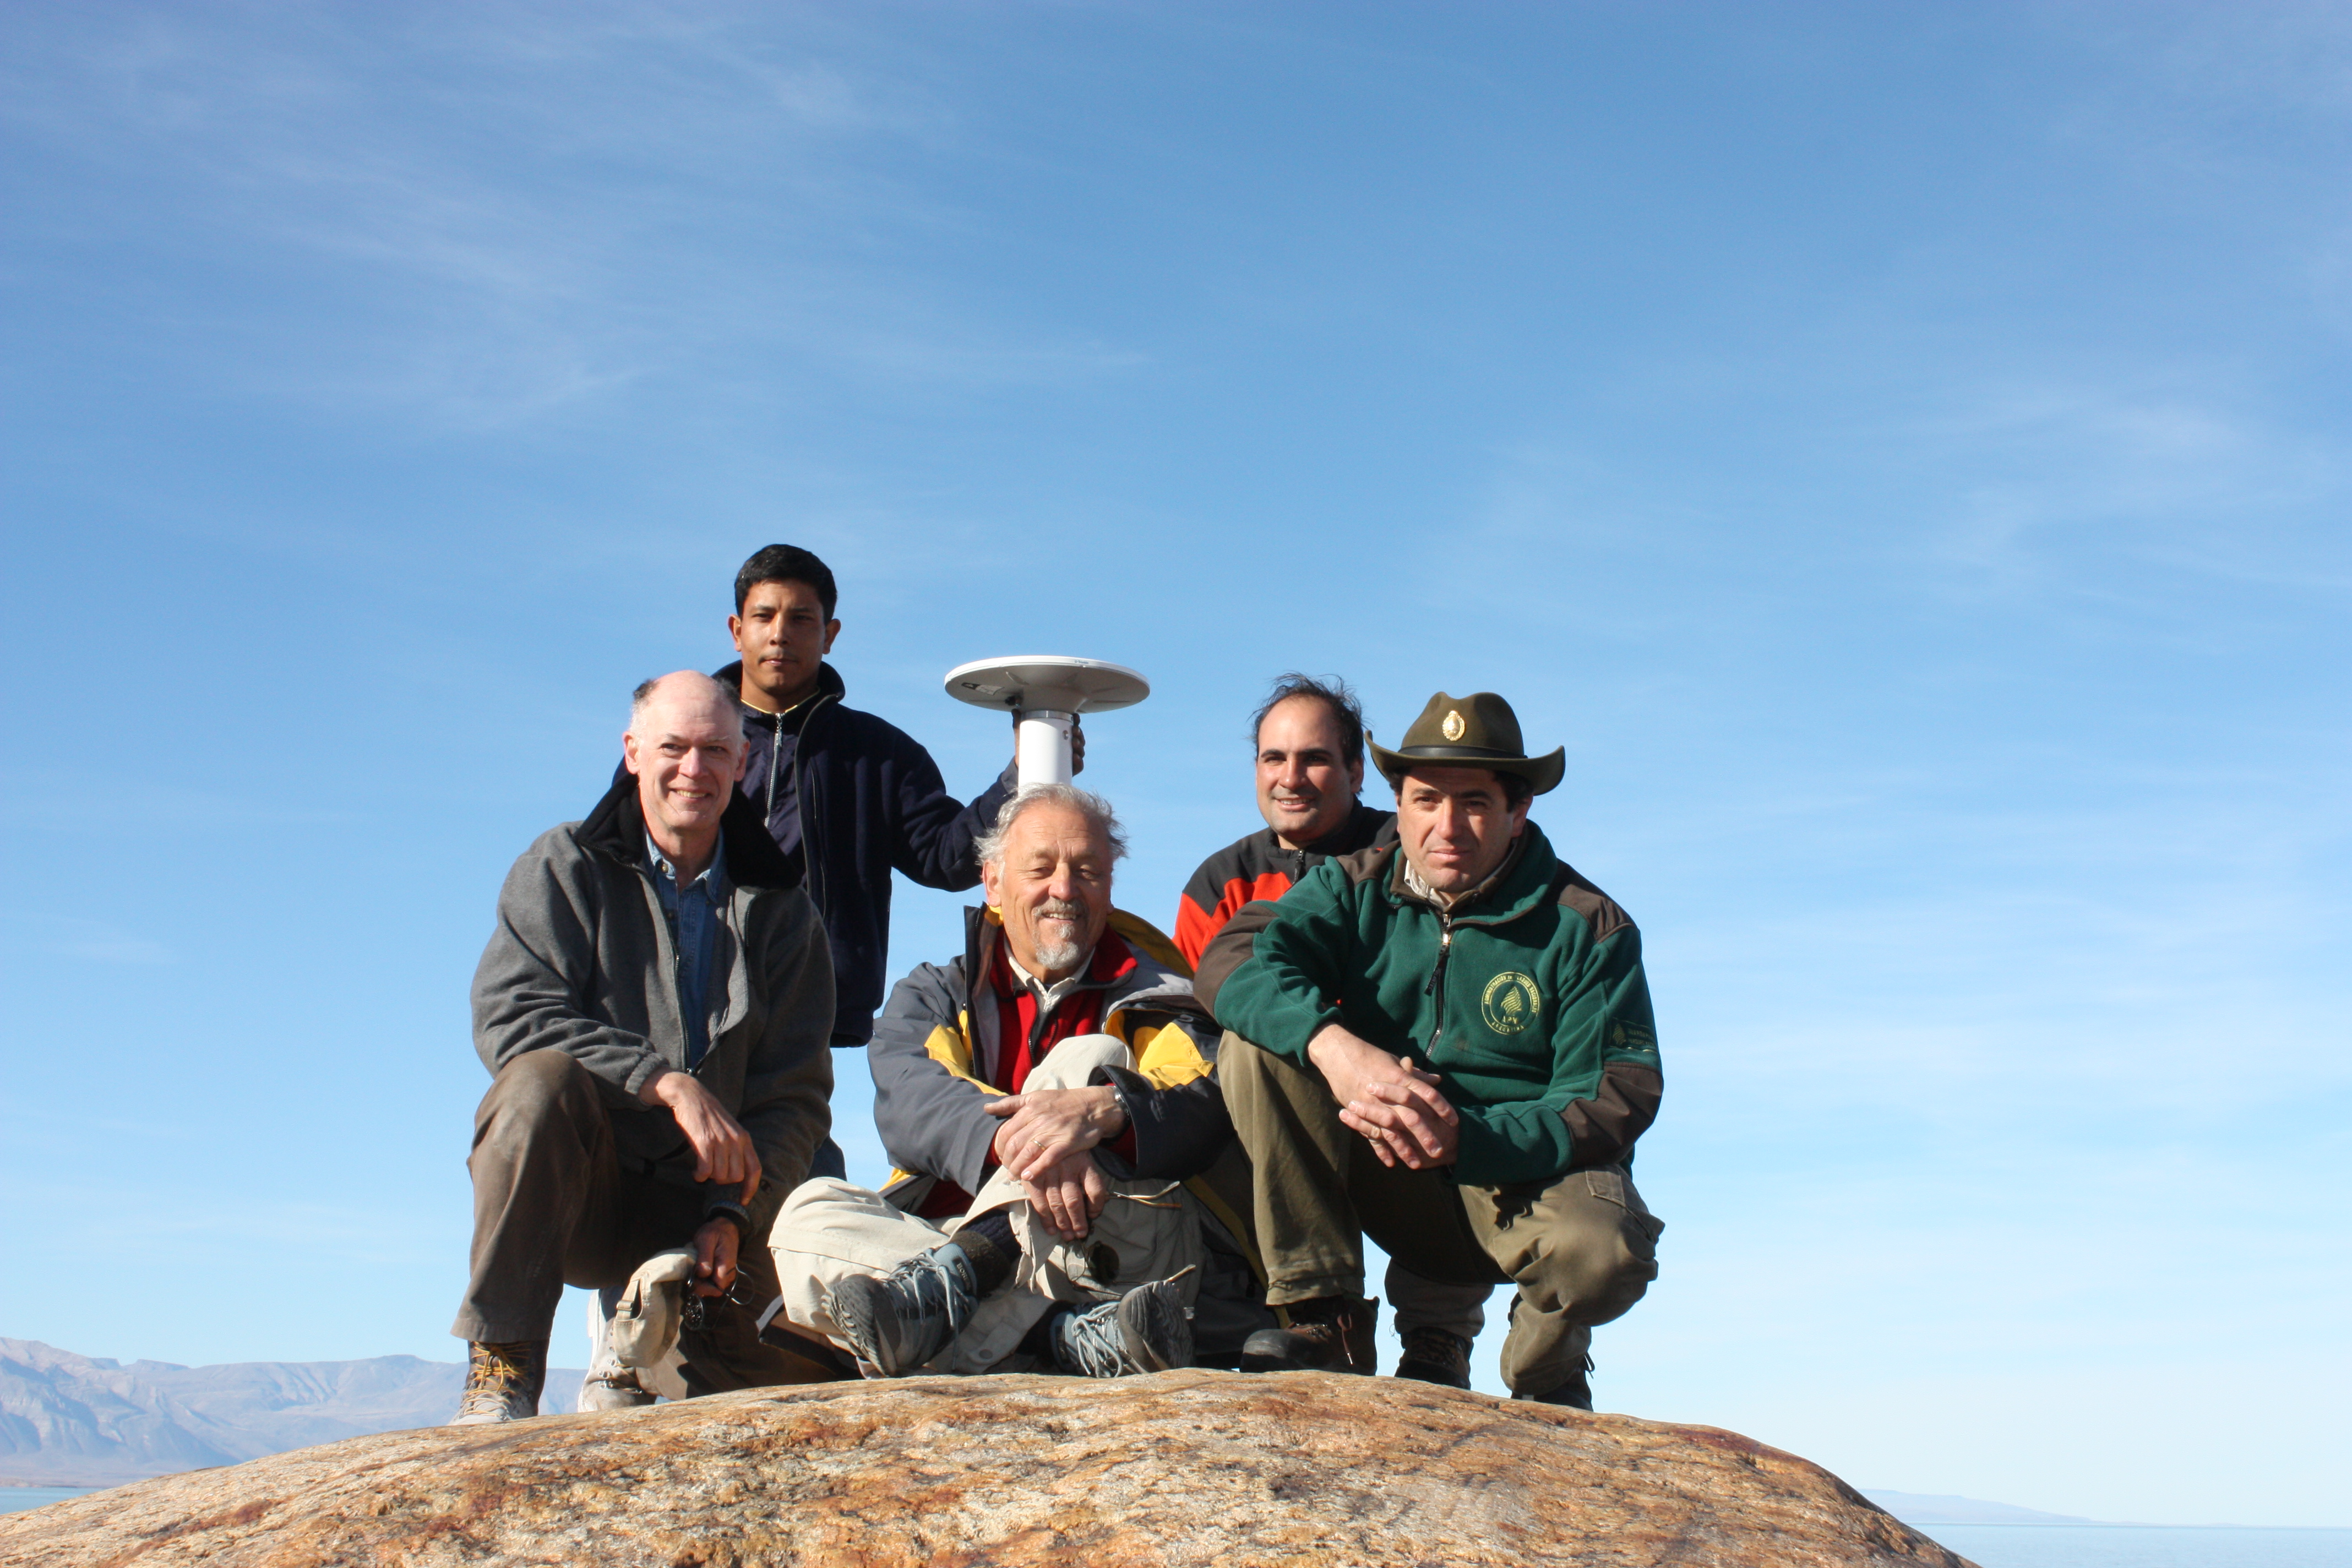 A group of 5 men crouched down on a hill with field equipment